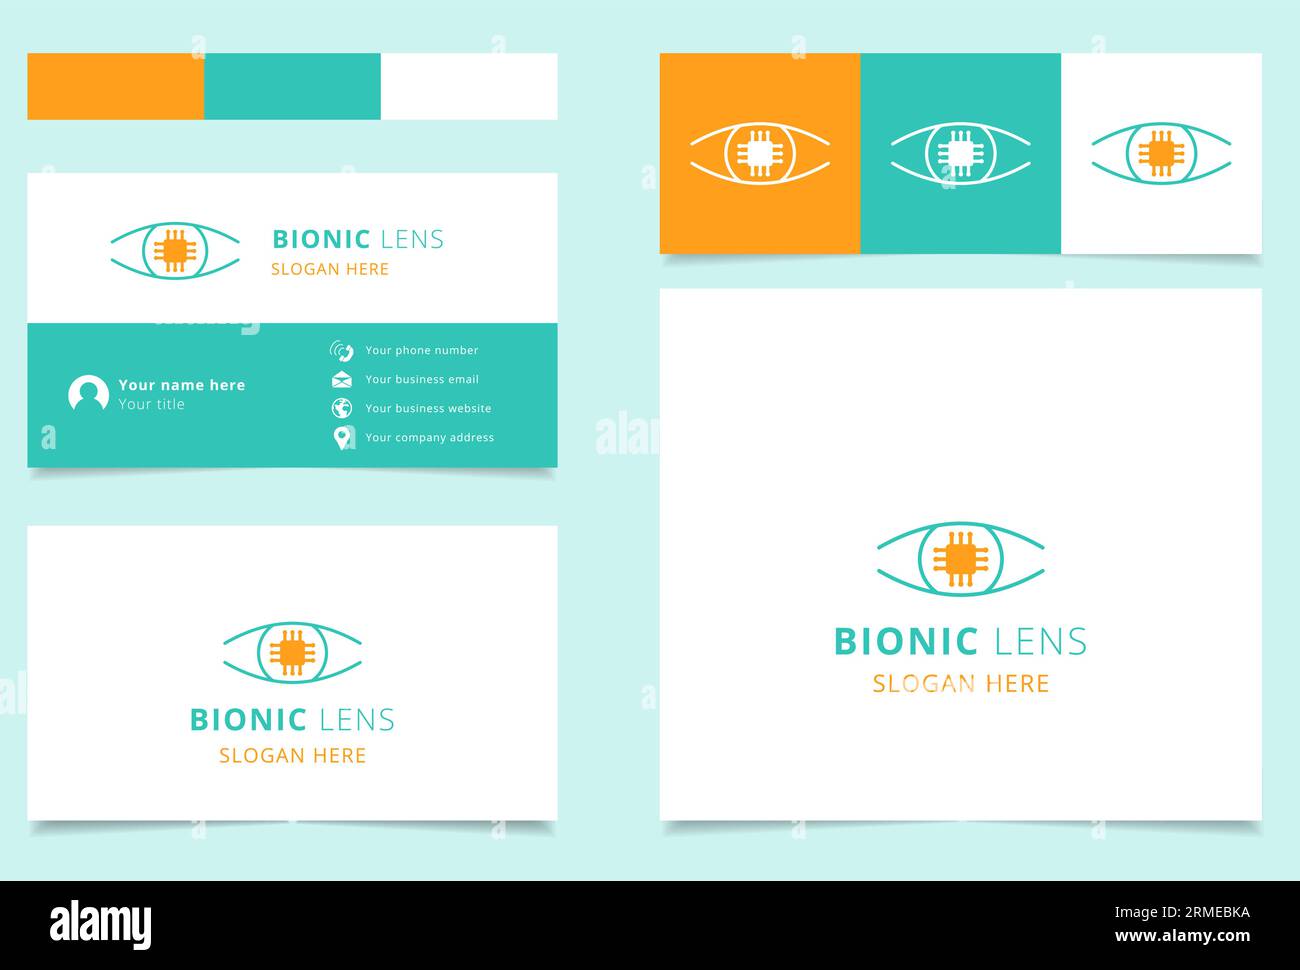 Bionic lens logo design with editable slogan. Branding book and business card template. Stock Vector